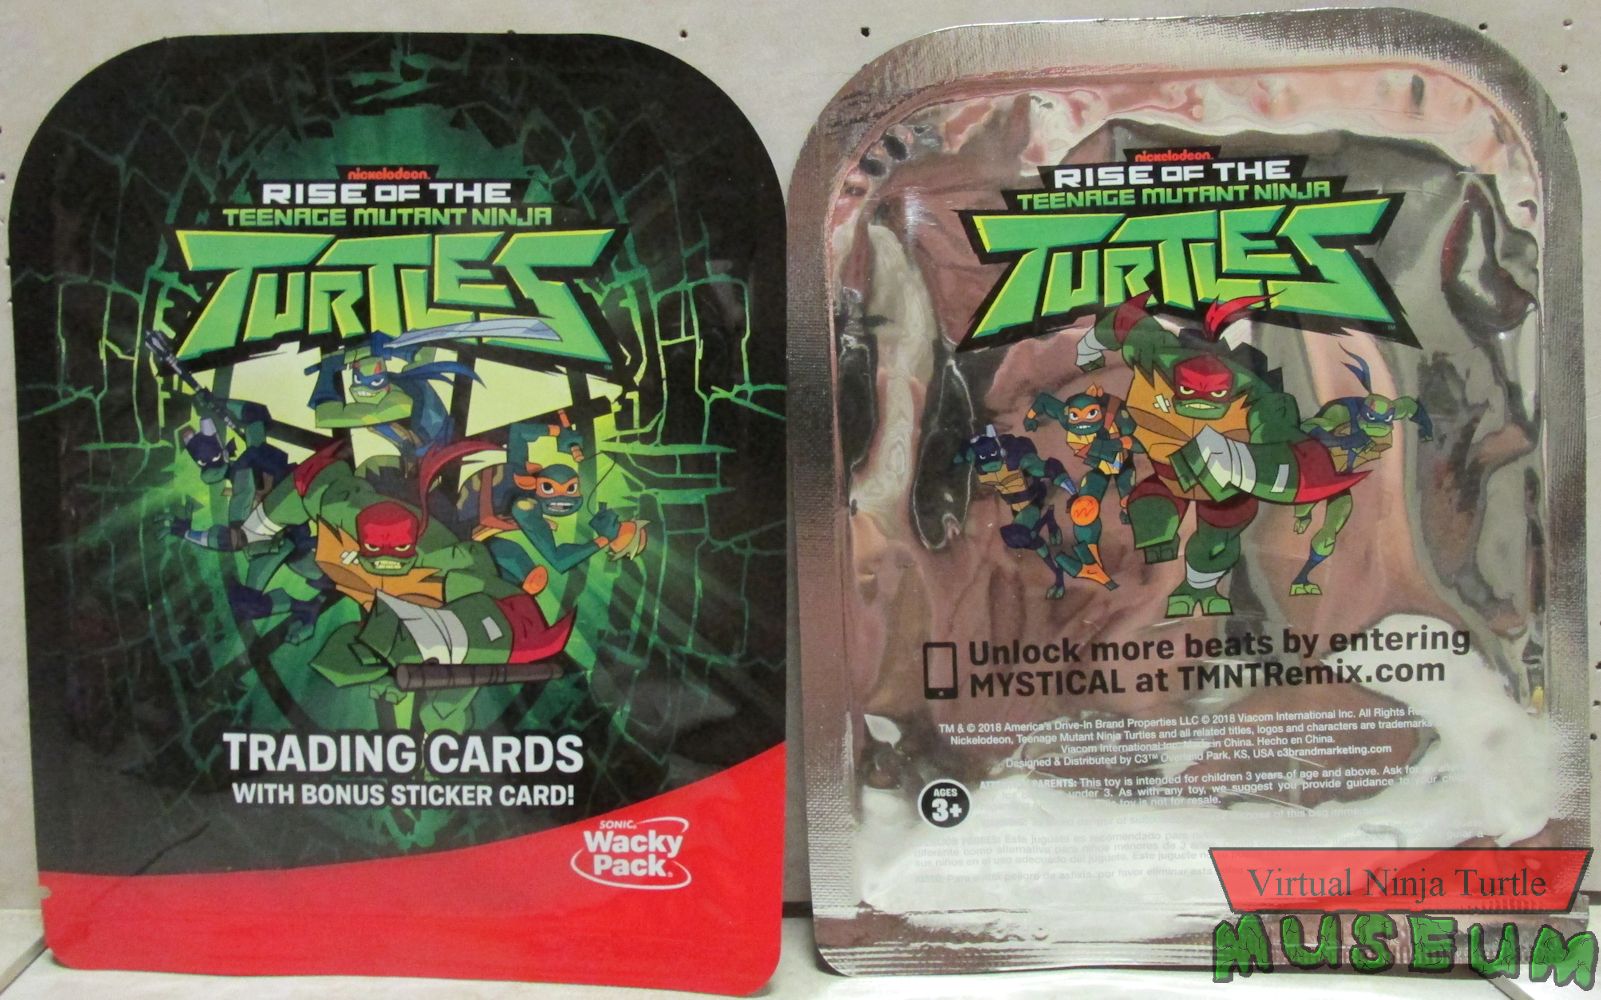 Trading Card Pack front and back